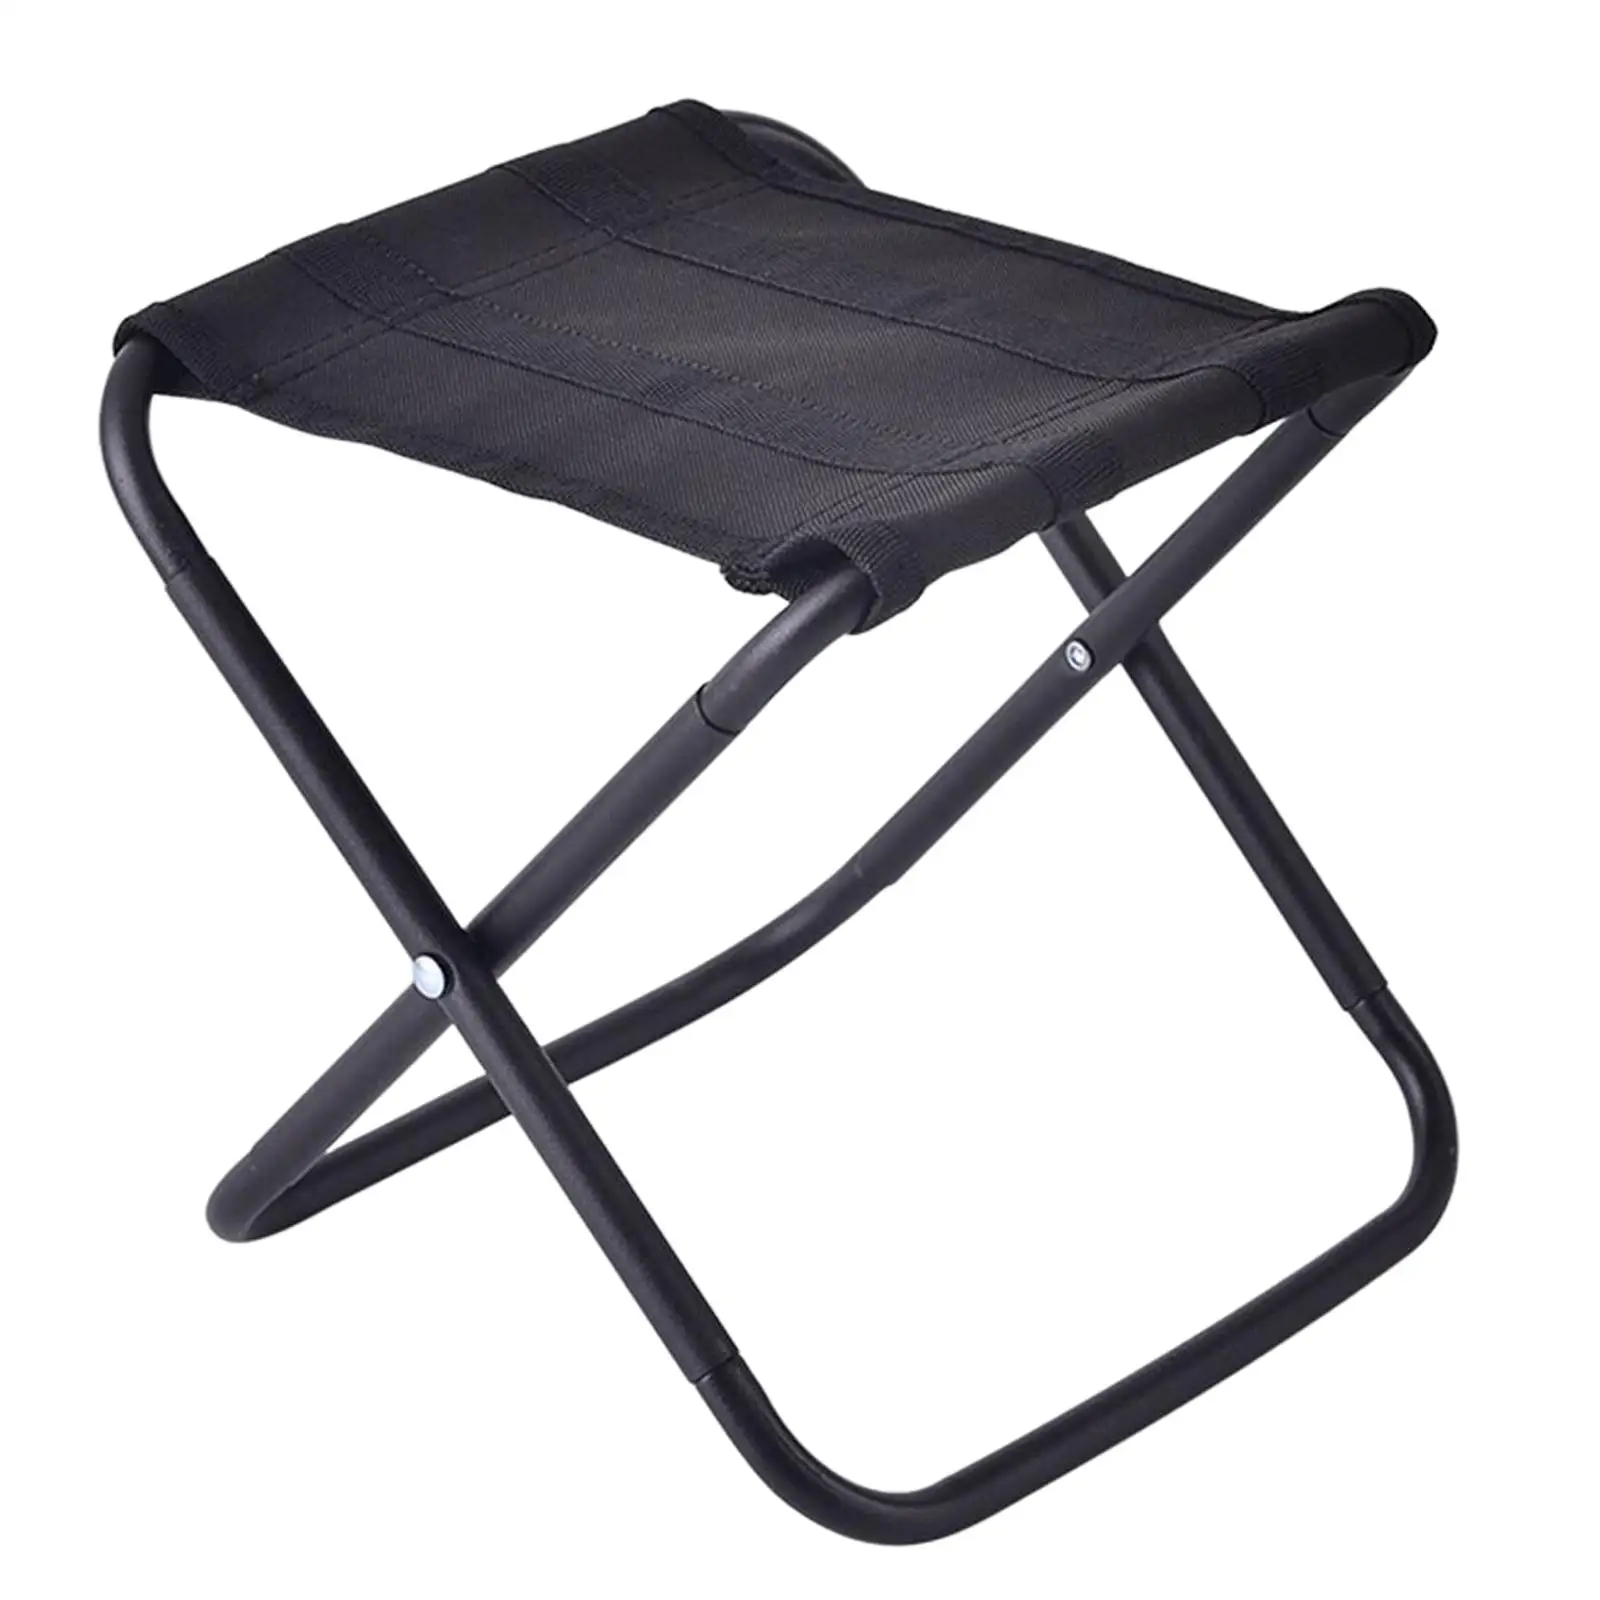 Camp Stool Aluminum Alloy Foldable Footstool for Backpacking Fishing Lounge